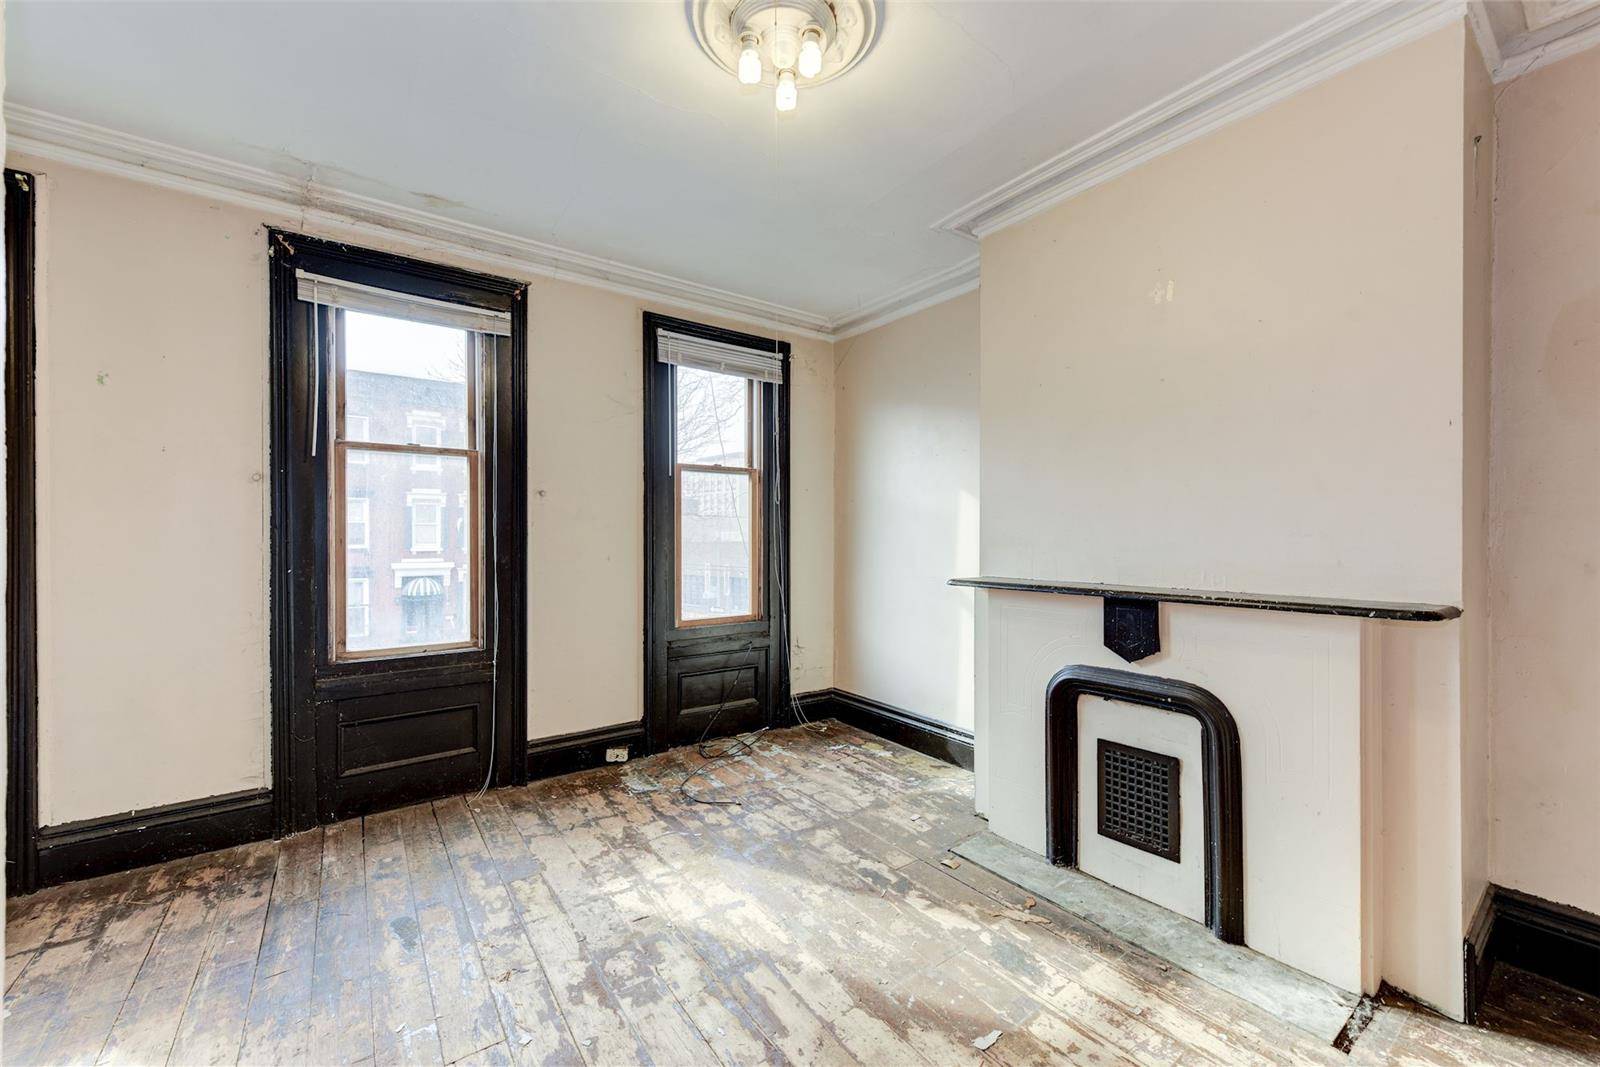 699, 000 This Gorgeous Townhouse is located at 138 E 150th St.